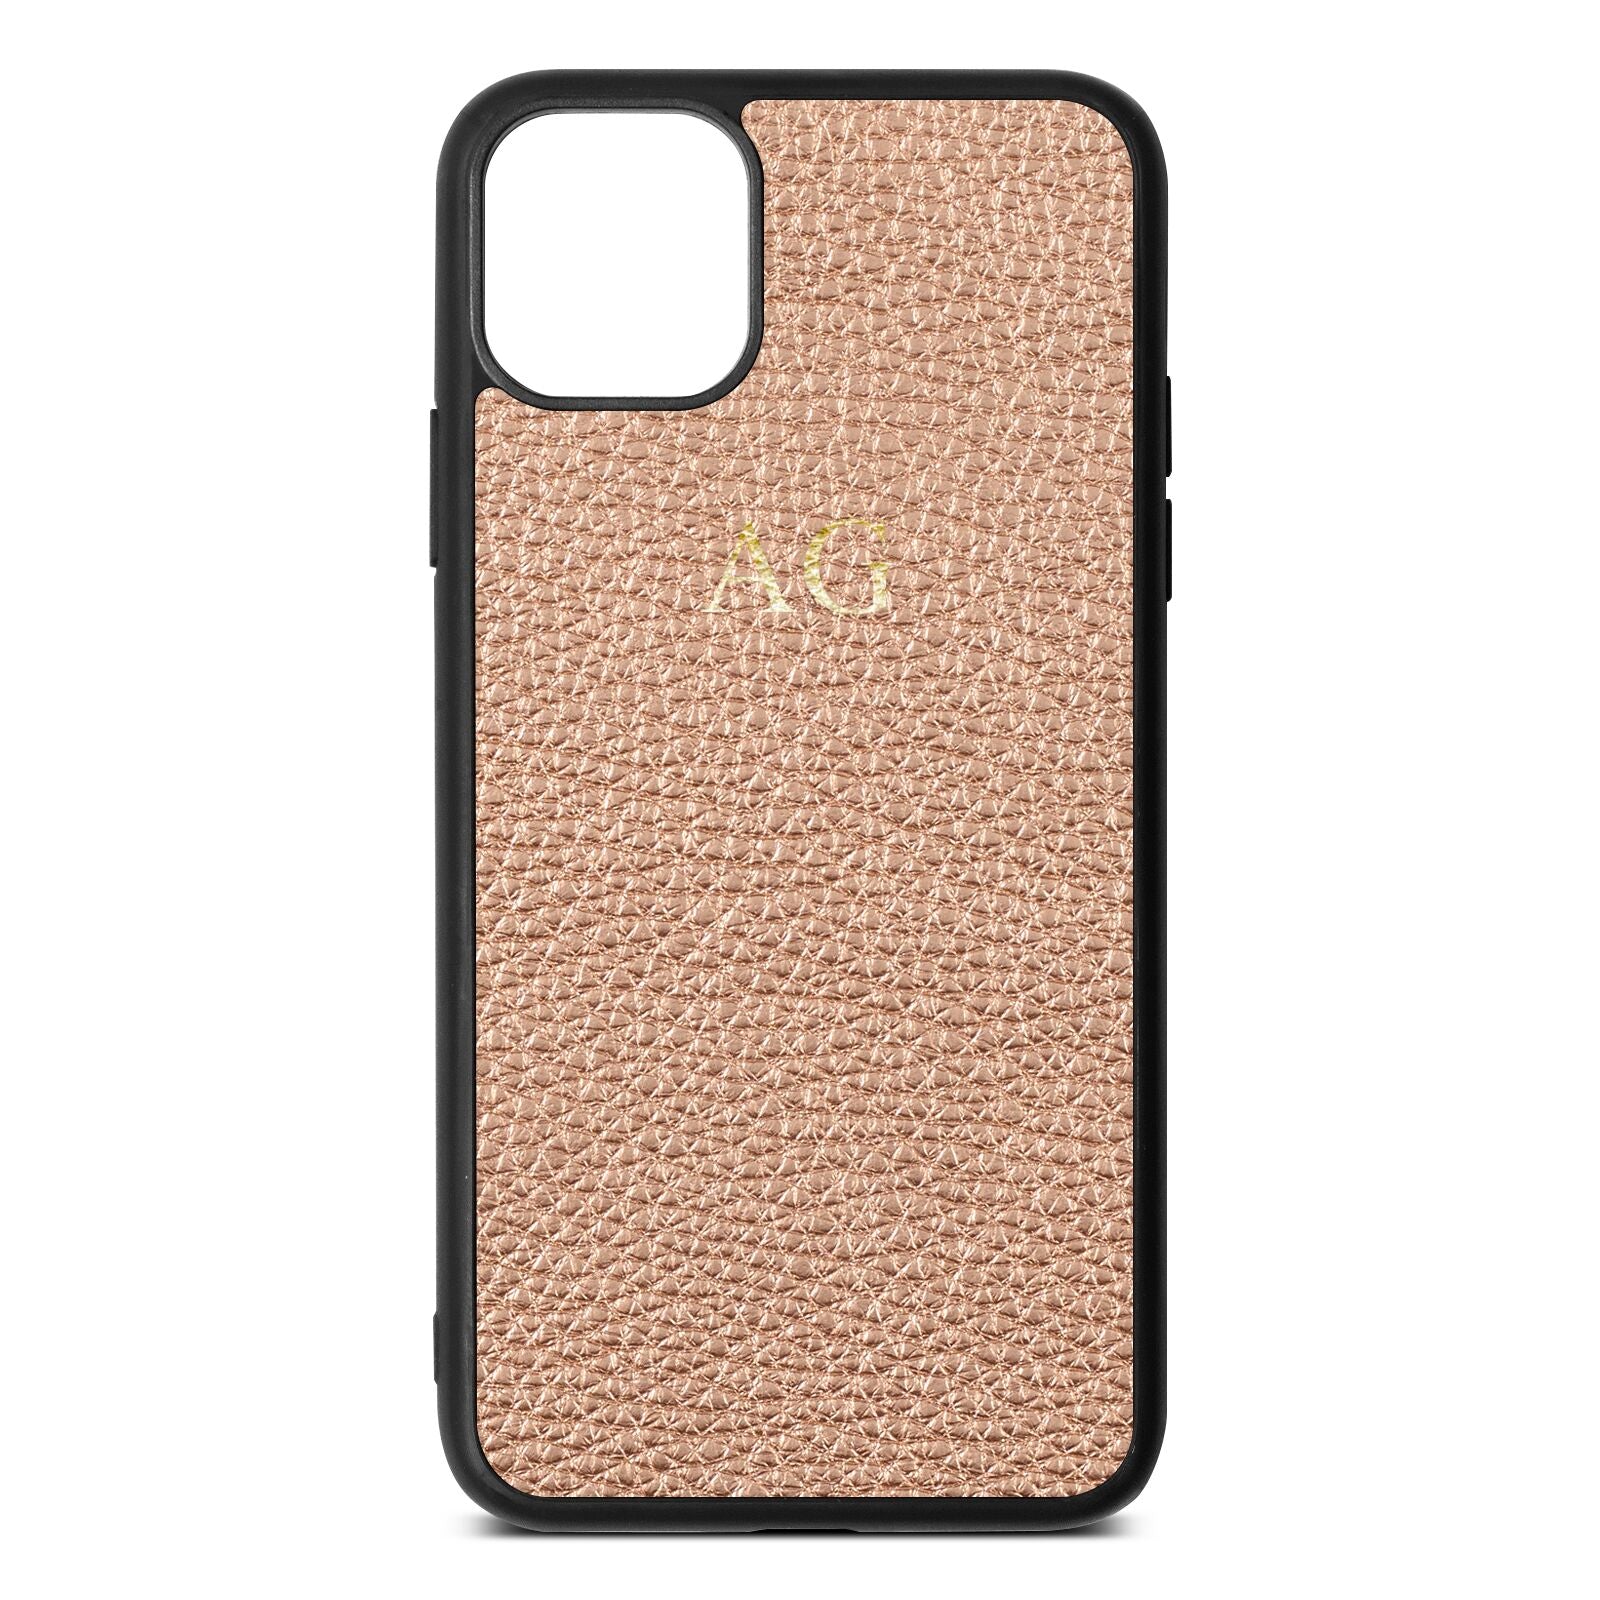 Personalised Rose Gold Pebble Leather iPhone 11 Pro Max Case